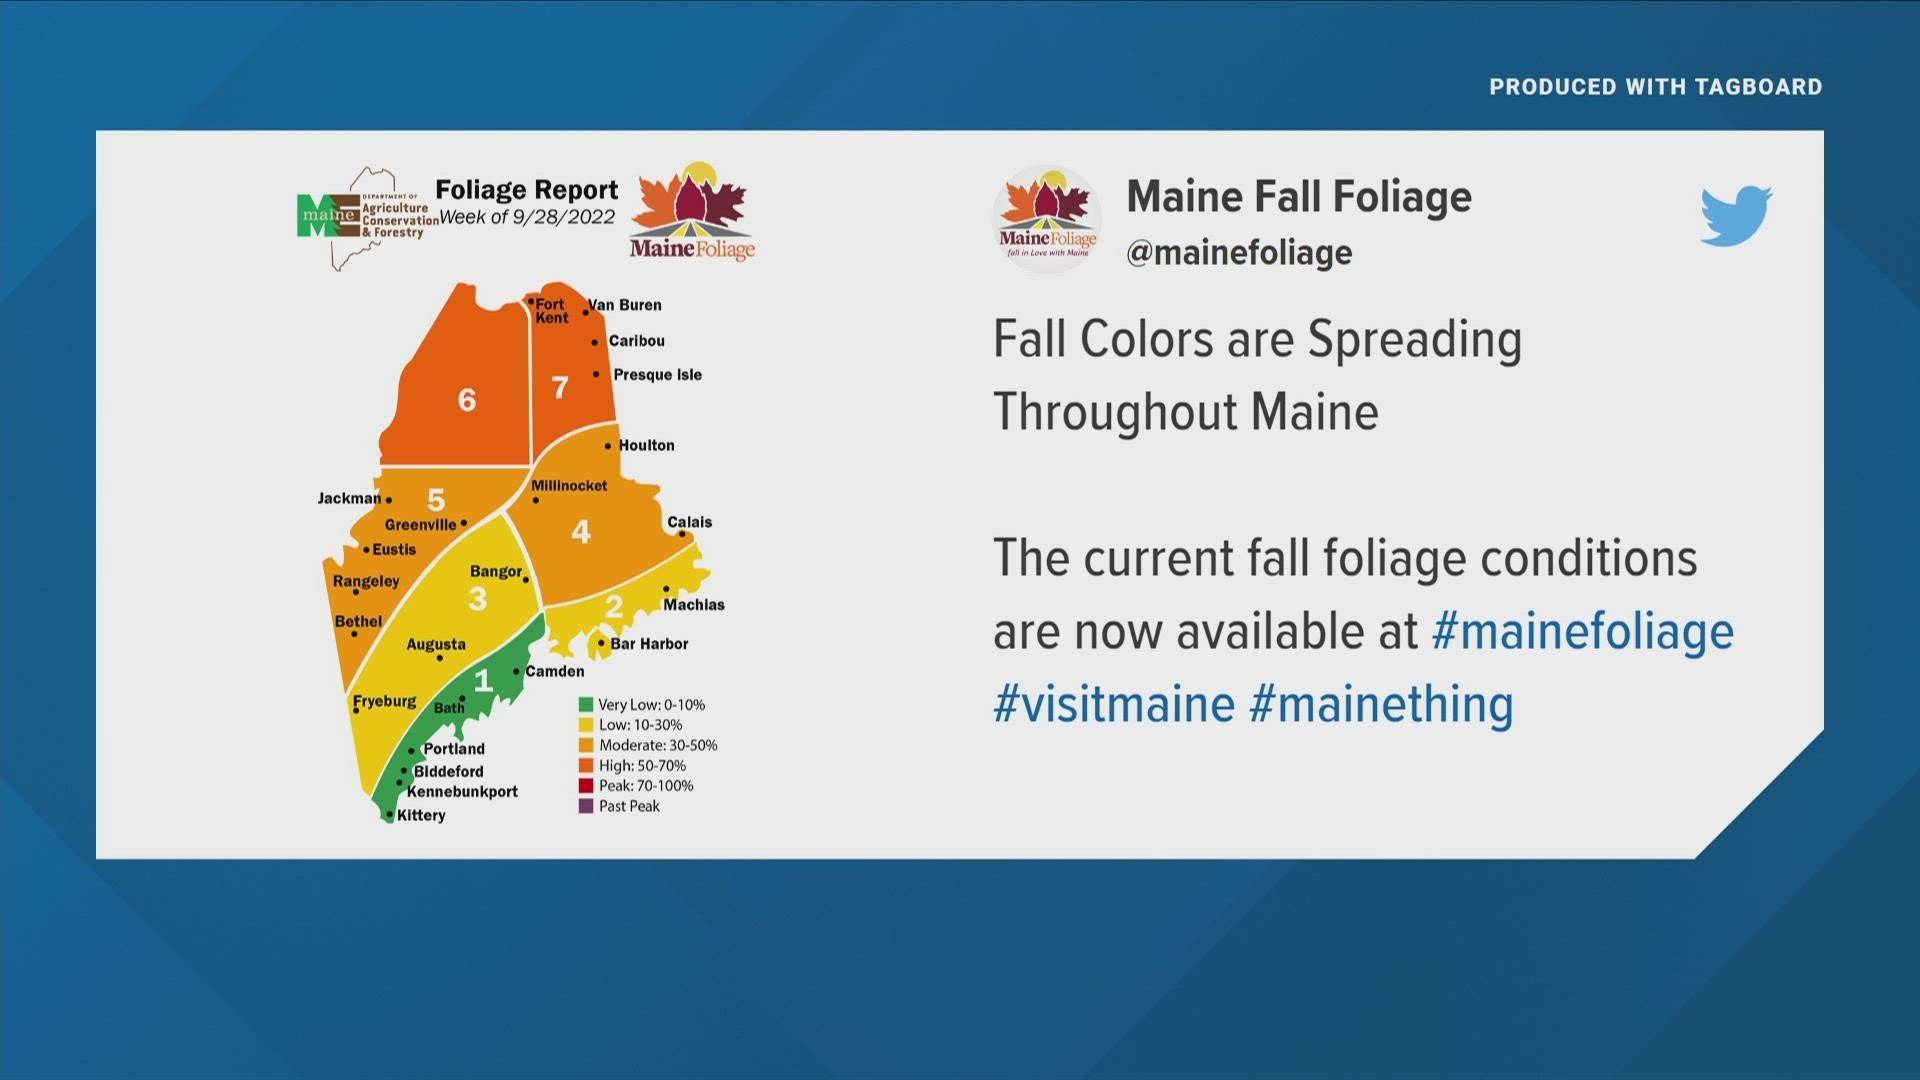 With October on the horizon, northern Maine will reach its peak foliage conditions next week.